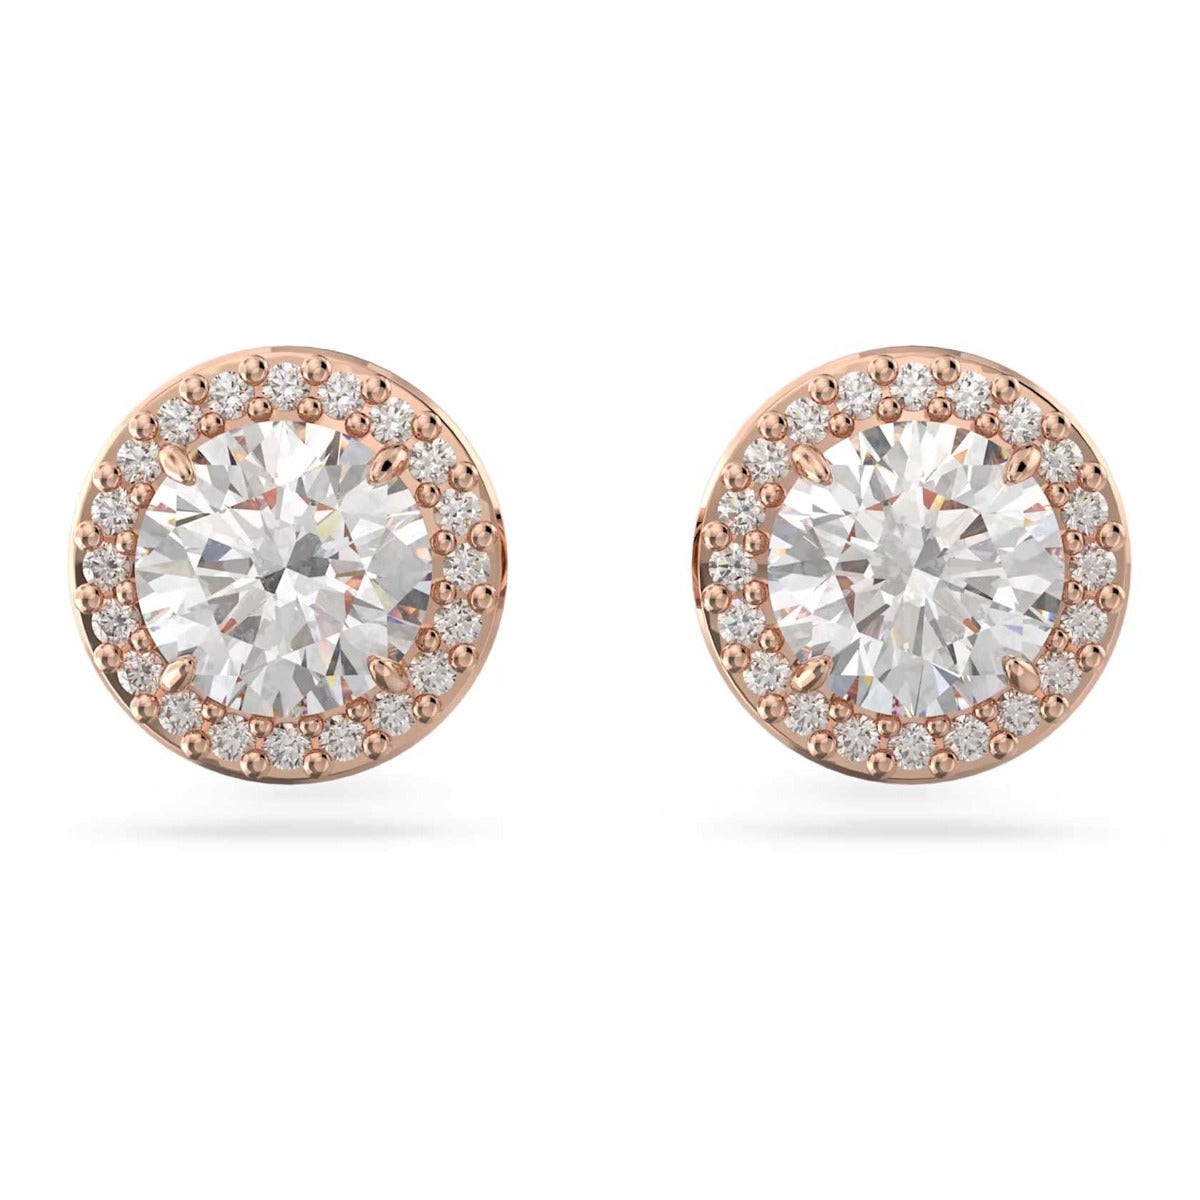 Swarovski Constella Stud Earrings, Round cut, Pave, White, Rose gold-tone plated